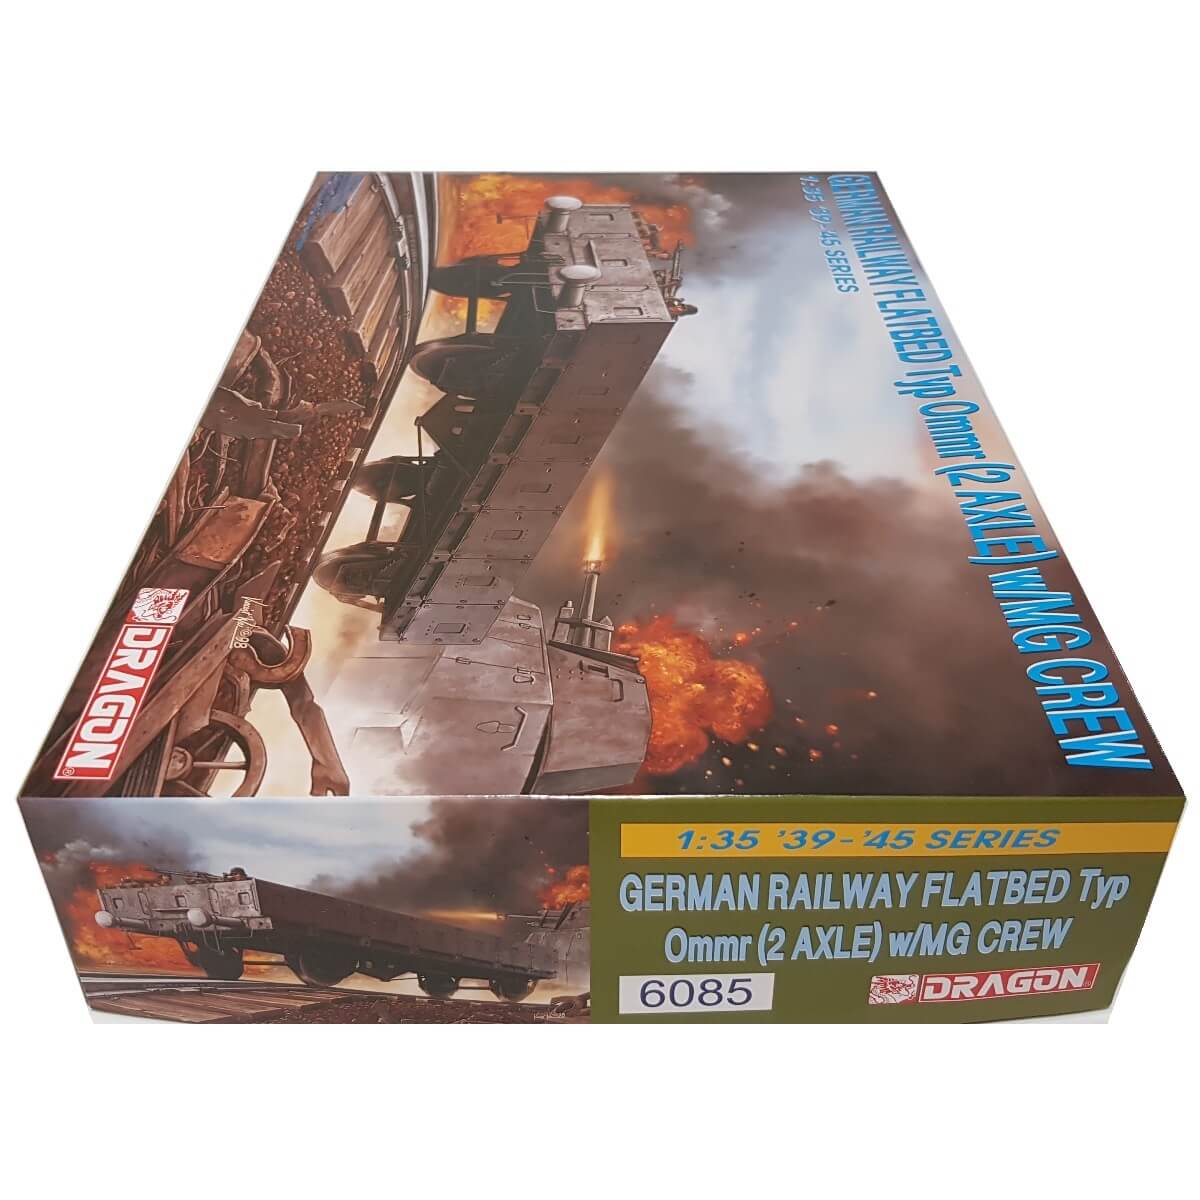 1:35 German Railway Flatbed Typ Ommr 2 Axle with MG Crew - DRAGON